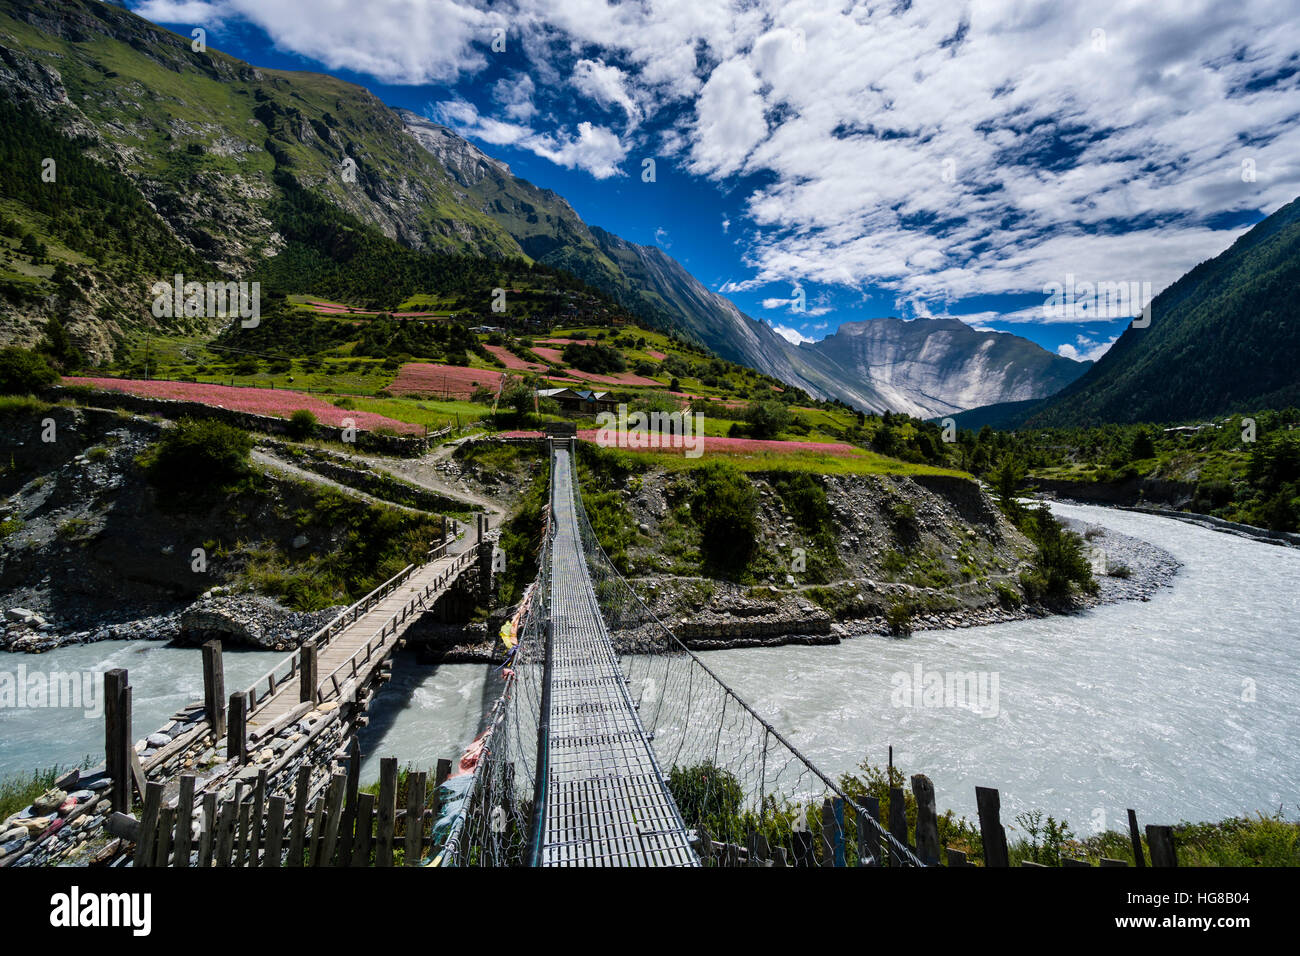 Two bridges are crossing the Marsyangdi river, Lower Pisang, Manang District, Nepal Stock Photo